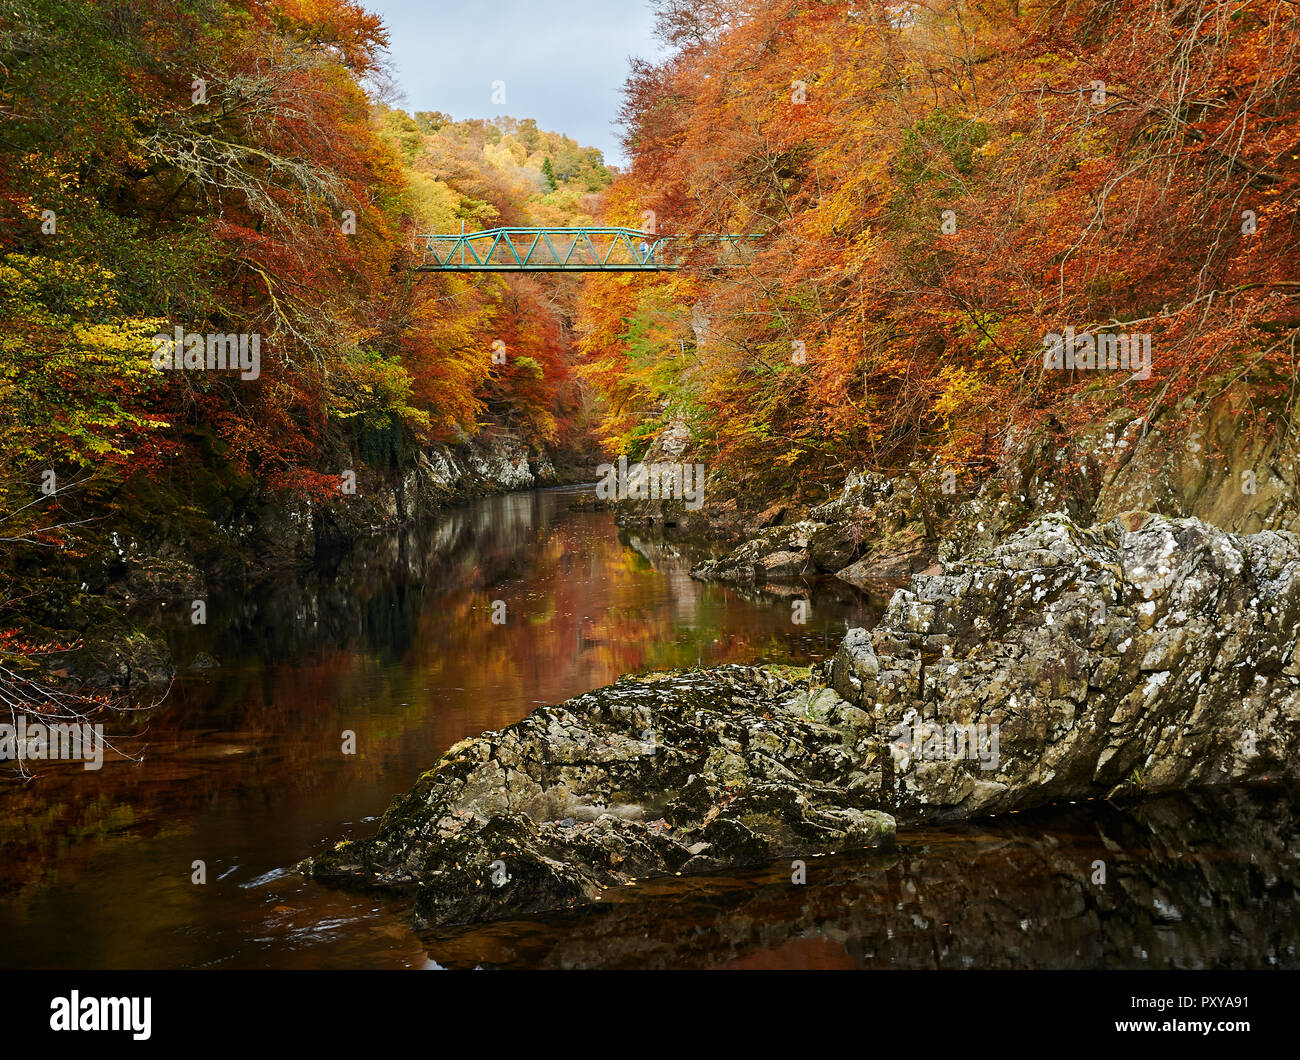 The green footbridge over the River Gary between Pitlochry and Killiecrankie, Perthshire, Scotland in autumn. Stock Photo